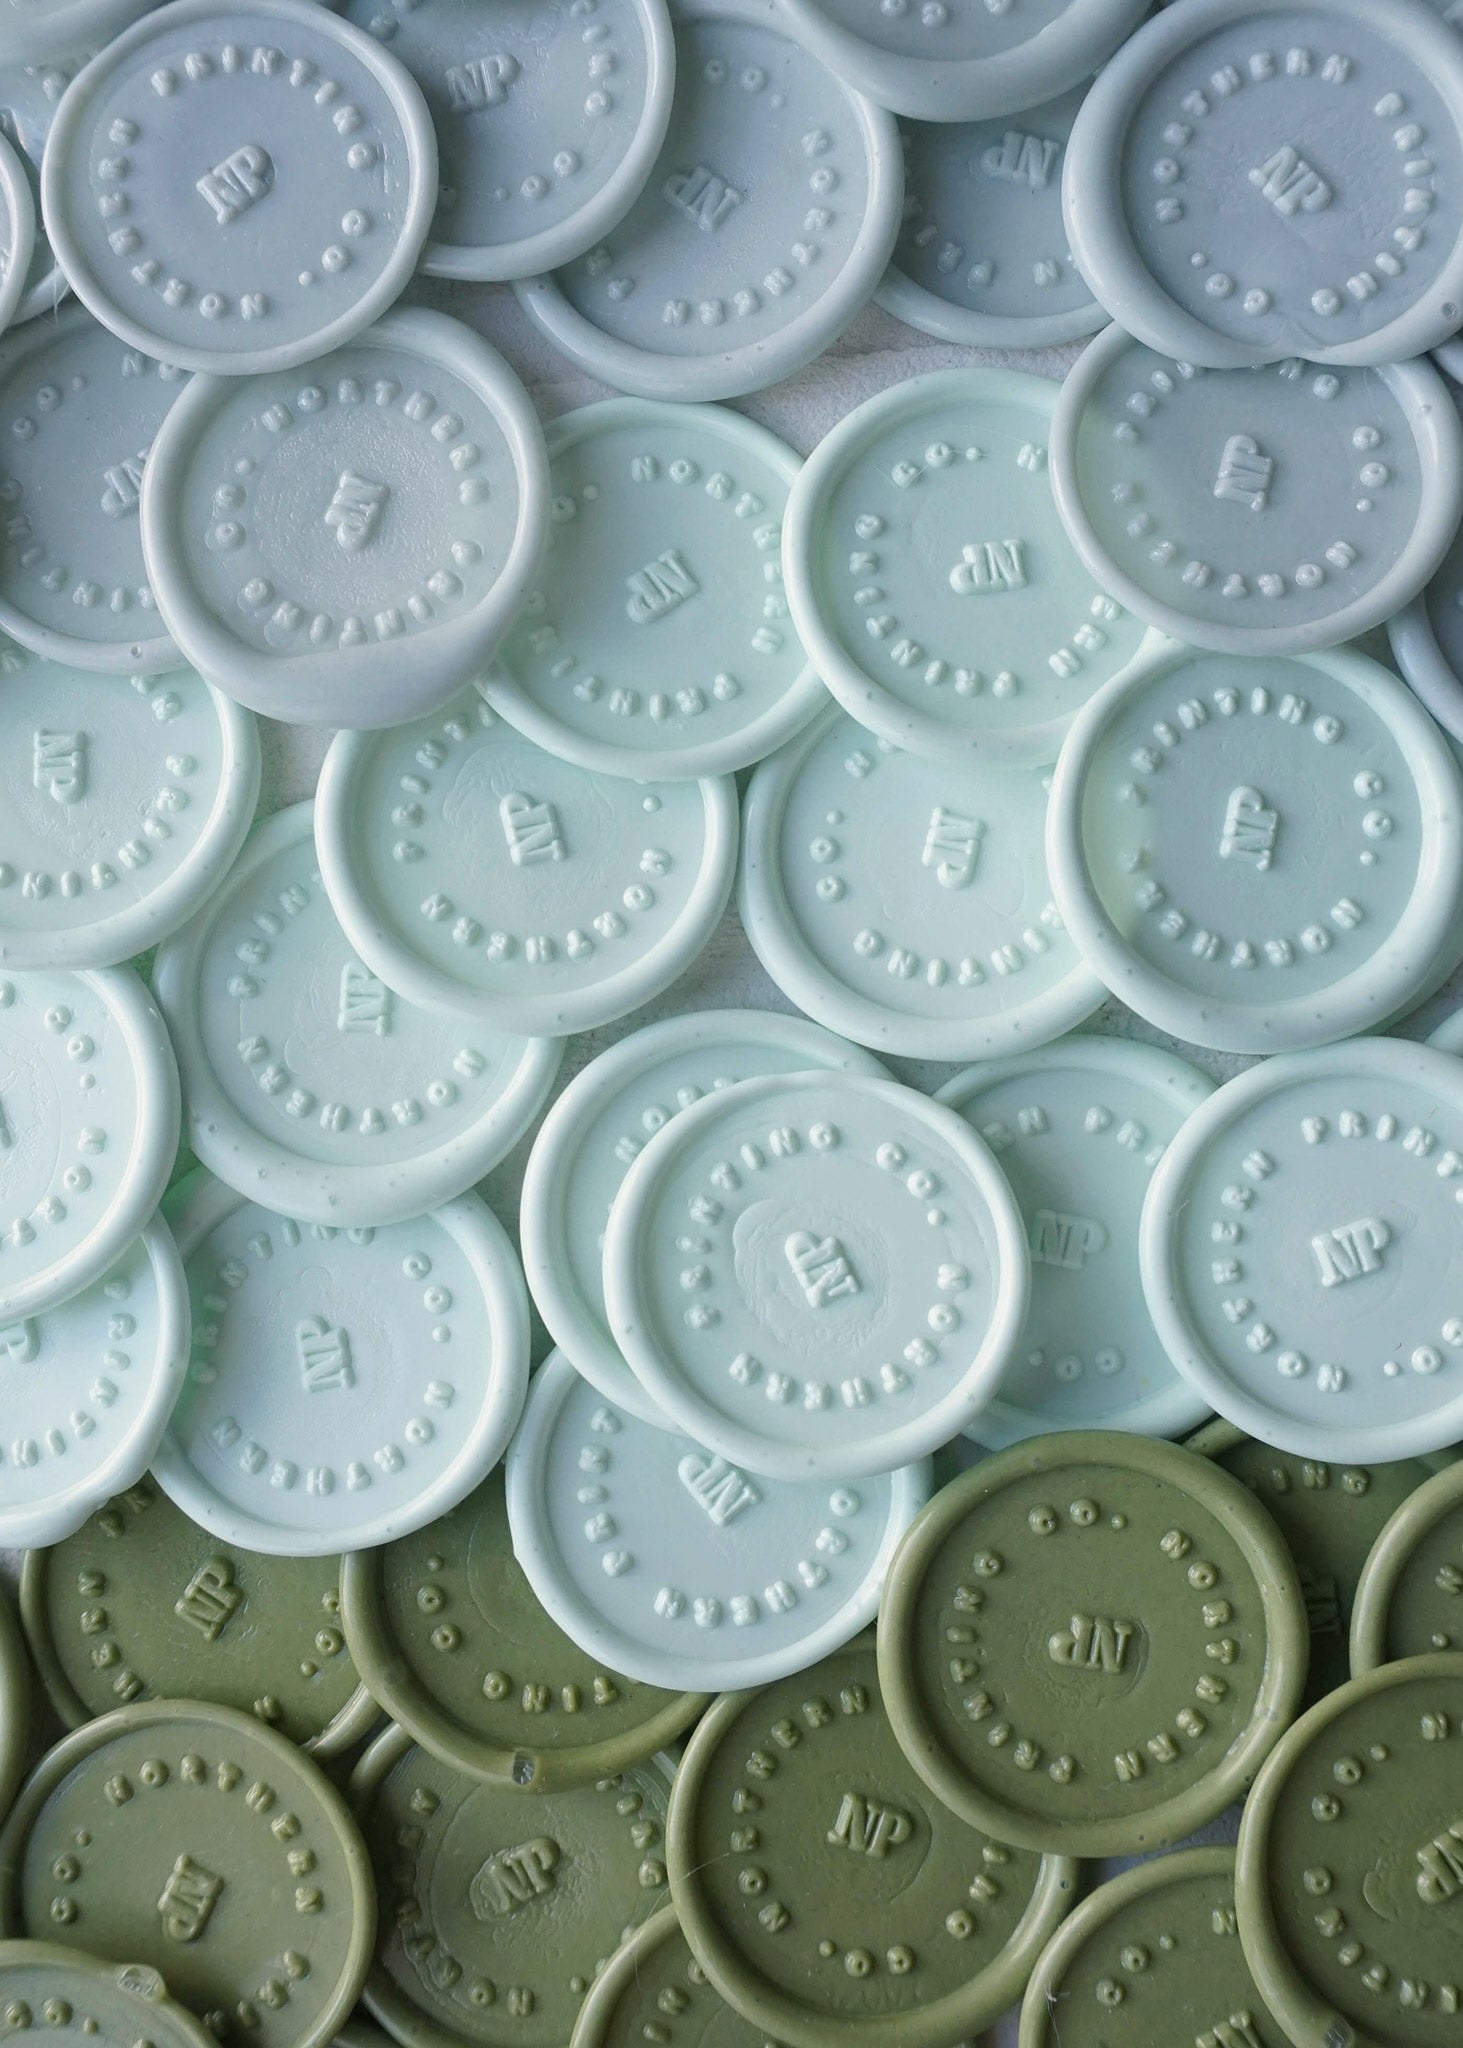 shades of blue and green wax seal stamps 